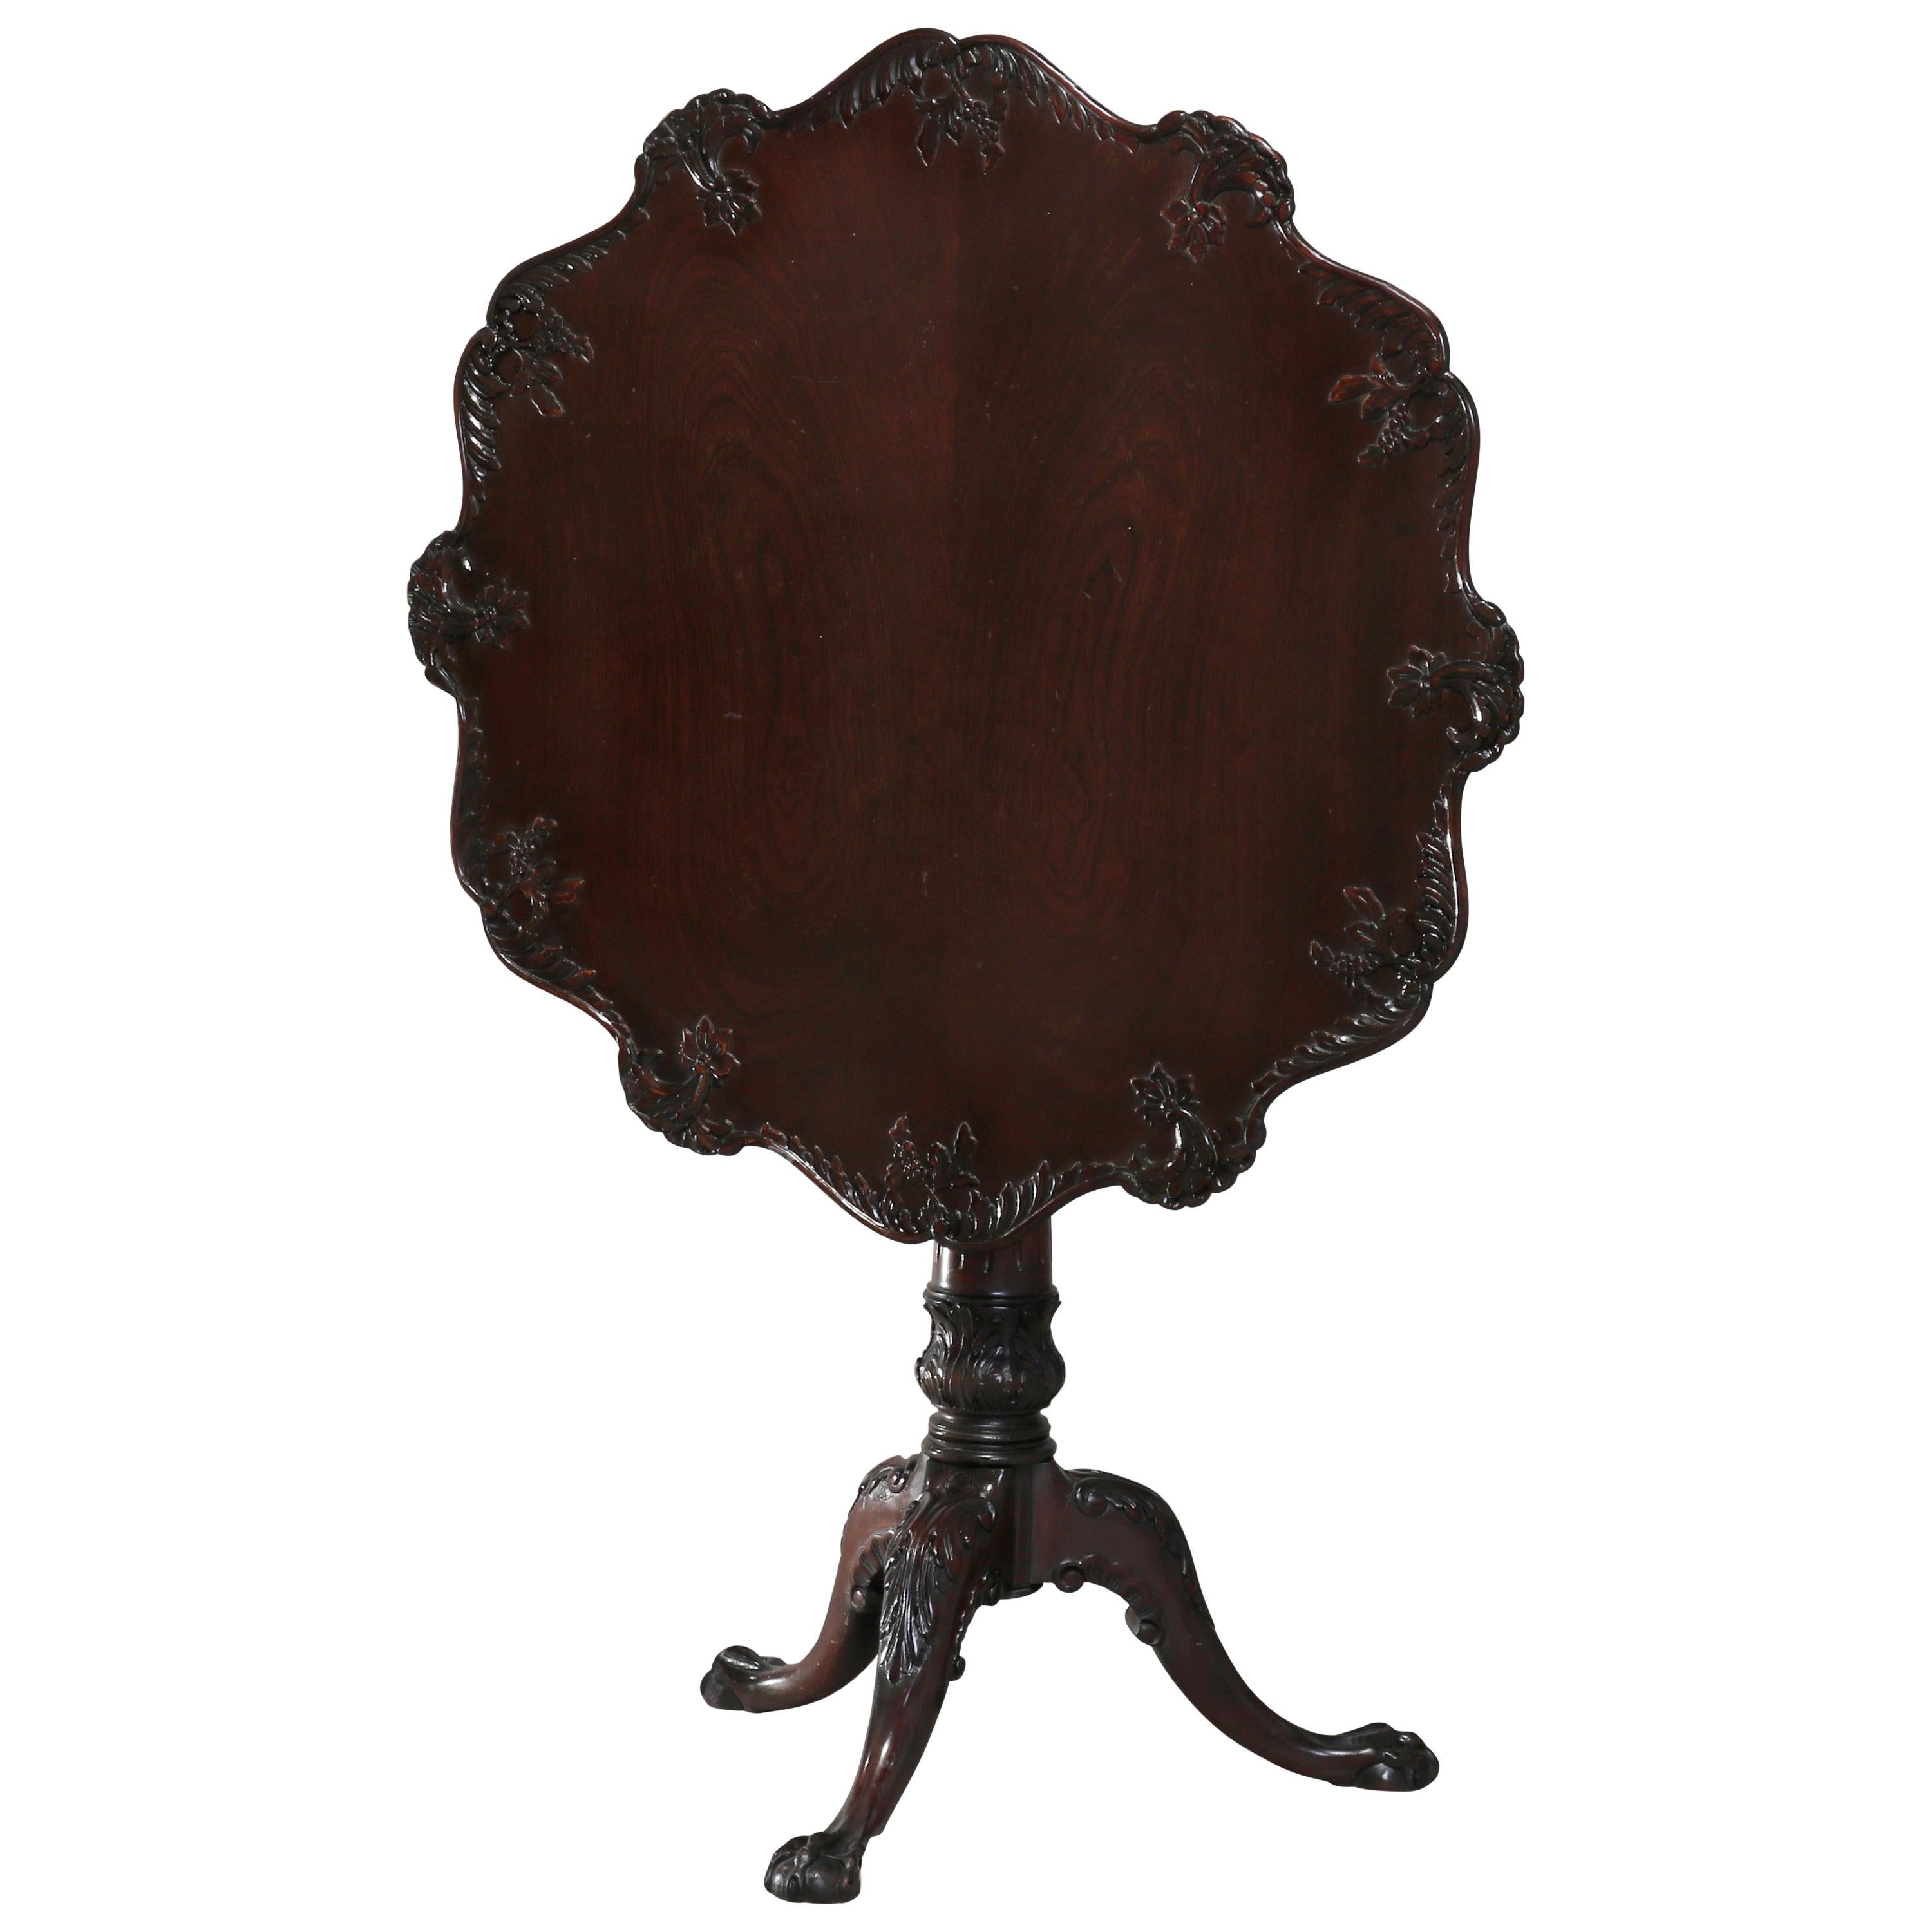 Antique American Empire Carved Mahogany Pie Crust Tilt-Top Table, 19th Century